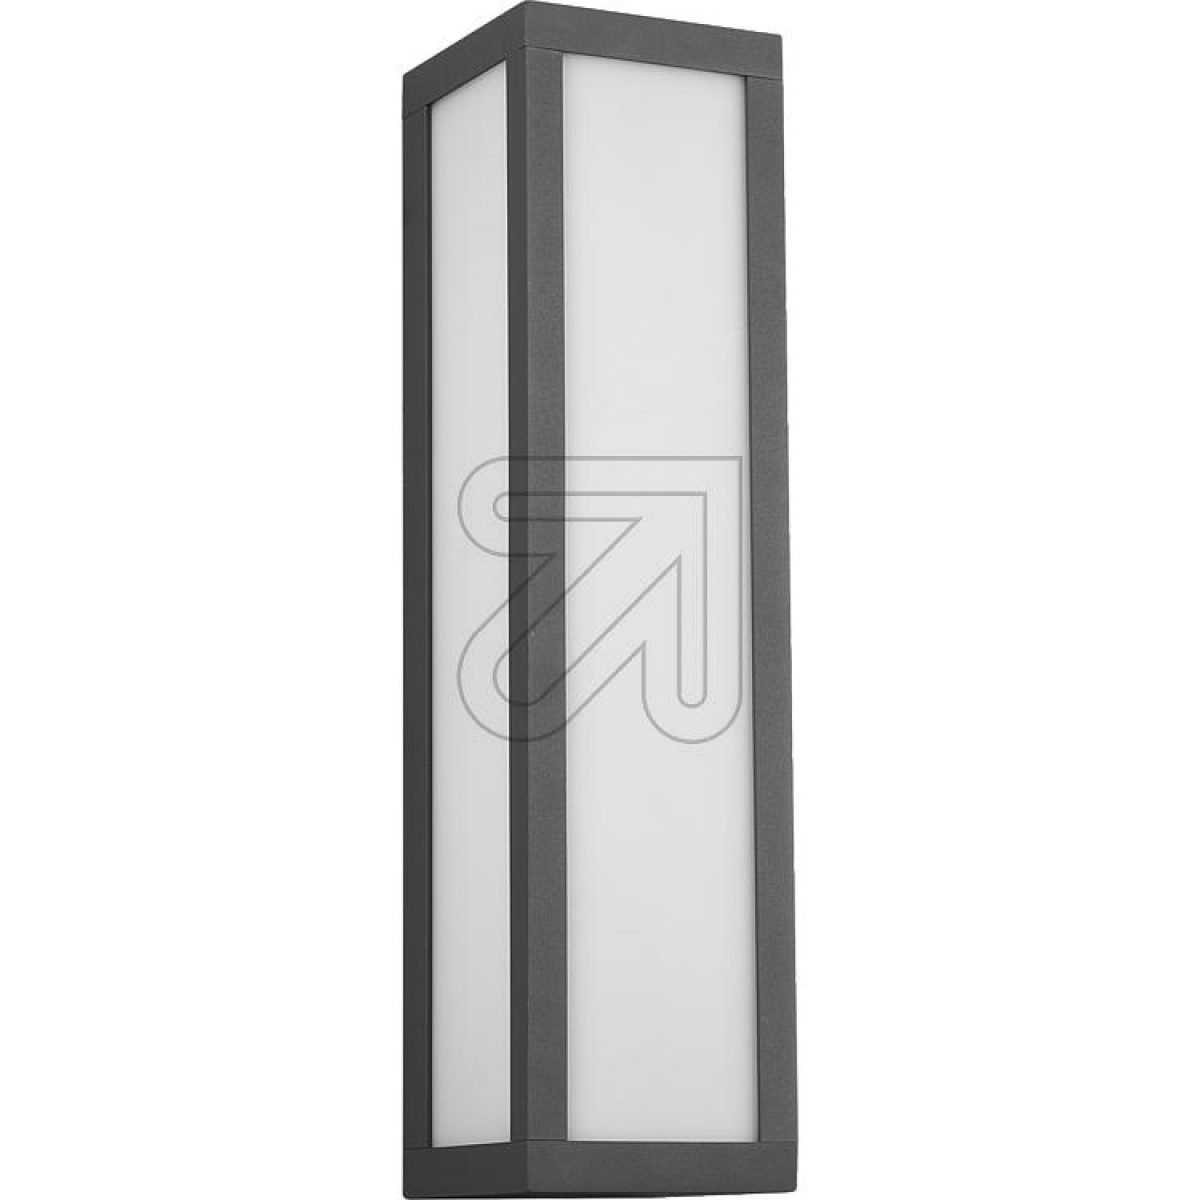 TRIOLED wall light anthracite Fuerte IP54 10.5W 3000K 226260142Article-No: 619800